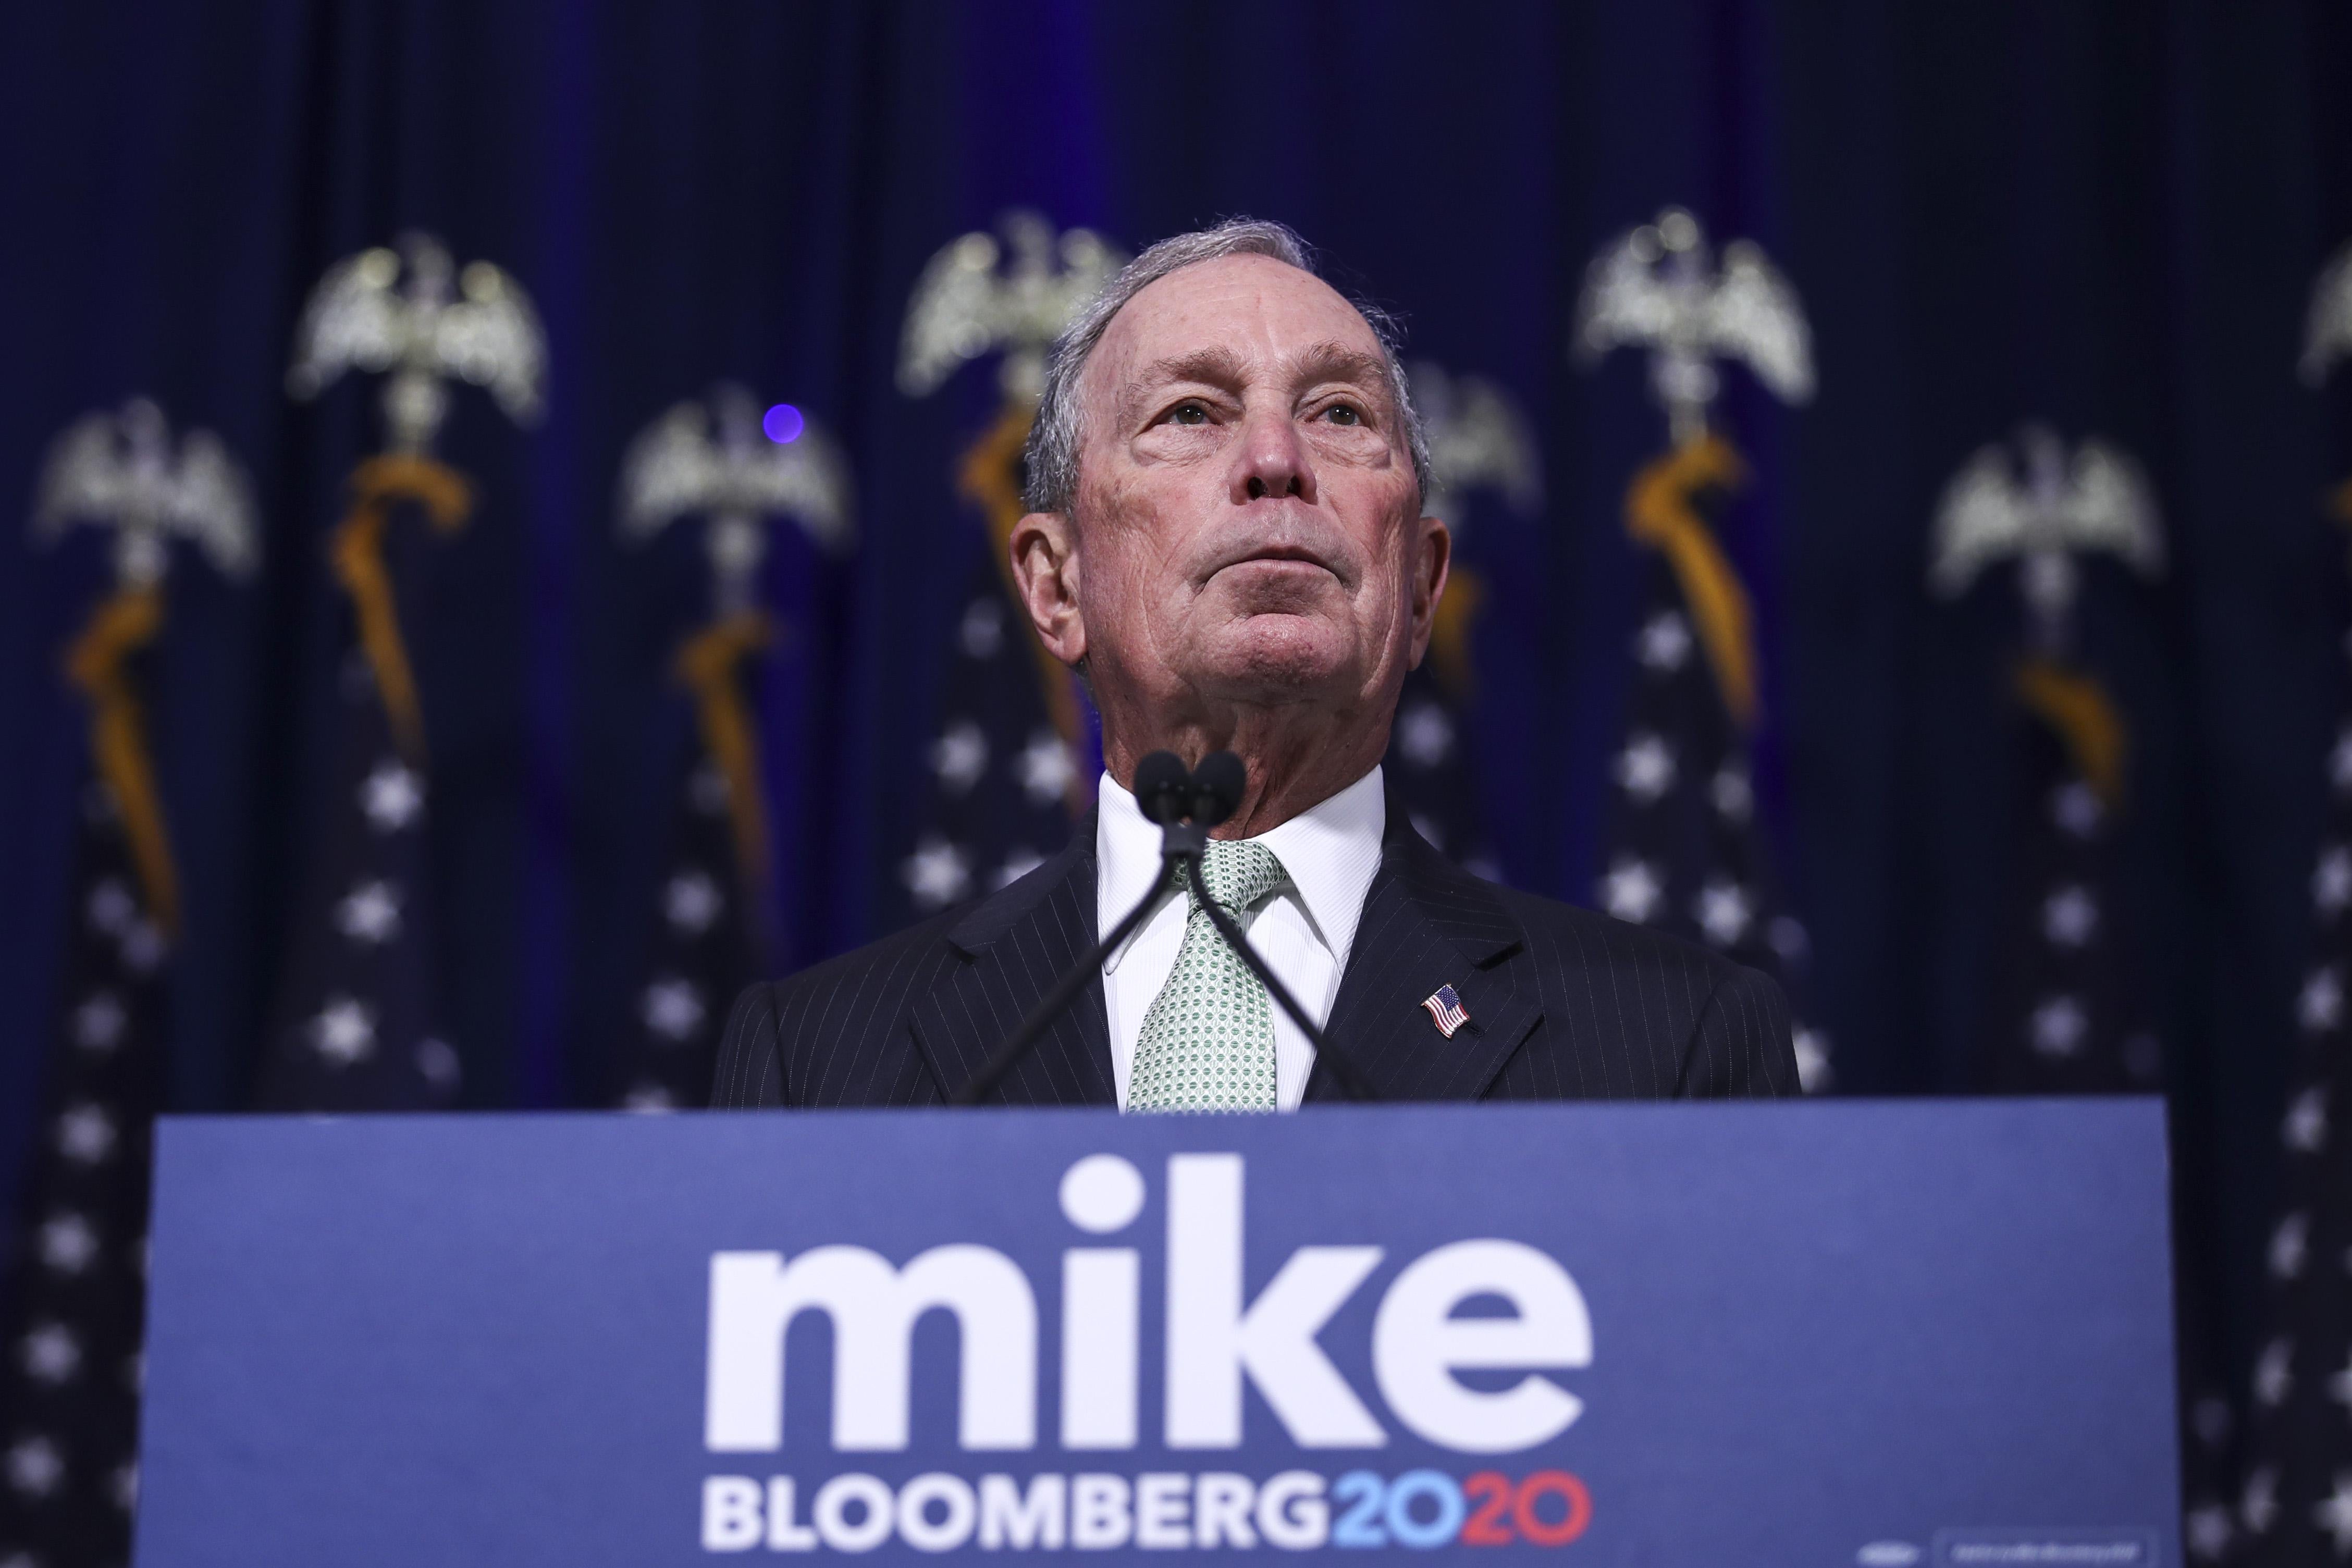 NORFOLK, VA - NOVEMBER 25: Newly announced Democratic presidential candidate, former New York Mayor Michael Bloomberg speaks during a press conference to discuss his presidential run on November 25, 2019 in Norfolk, Virginia. The 77-year old Bloomberg joins an already crowded Democratic field and is presenting himself as a moderate and pragmatic option in contrast to the current Democratic Party's increasingly leftward tilt. In recent years, Bloomberg has used some of his vast personal fortune to push for stronger gun safety laws and action on climate change. (Photo by Drew Angerer/Getty Images)